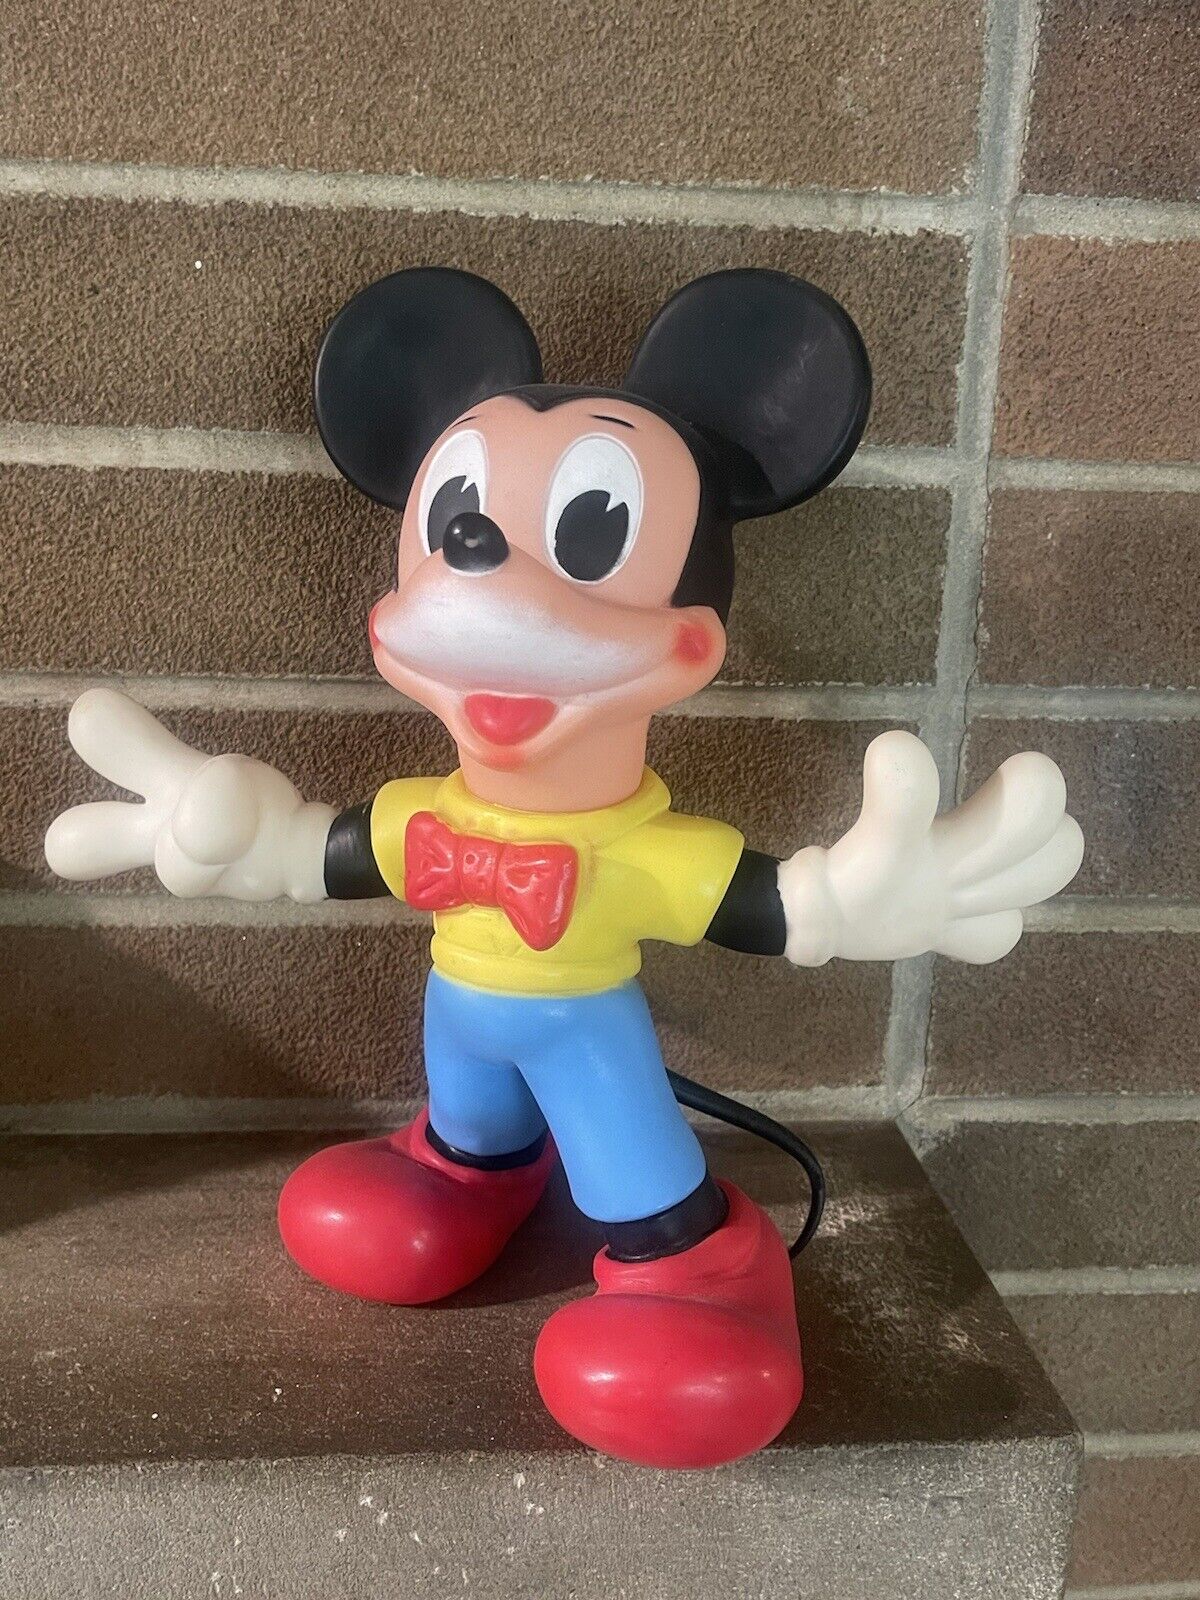 VINTAGE 1960's MICKEY MOUSE “LEDRA” Rubber Toy WALT DISNEY PRODUCTIONS 10” ITALY